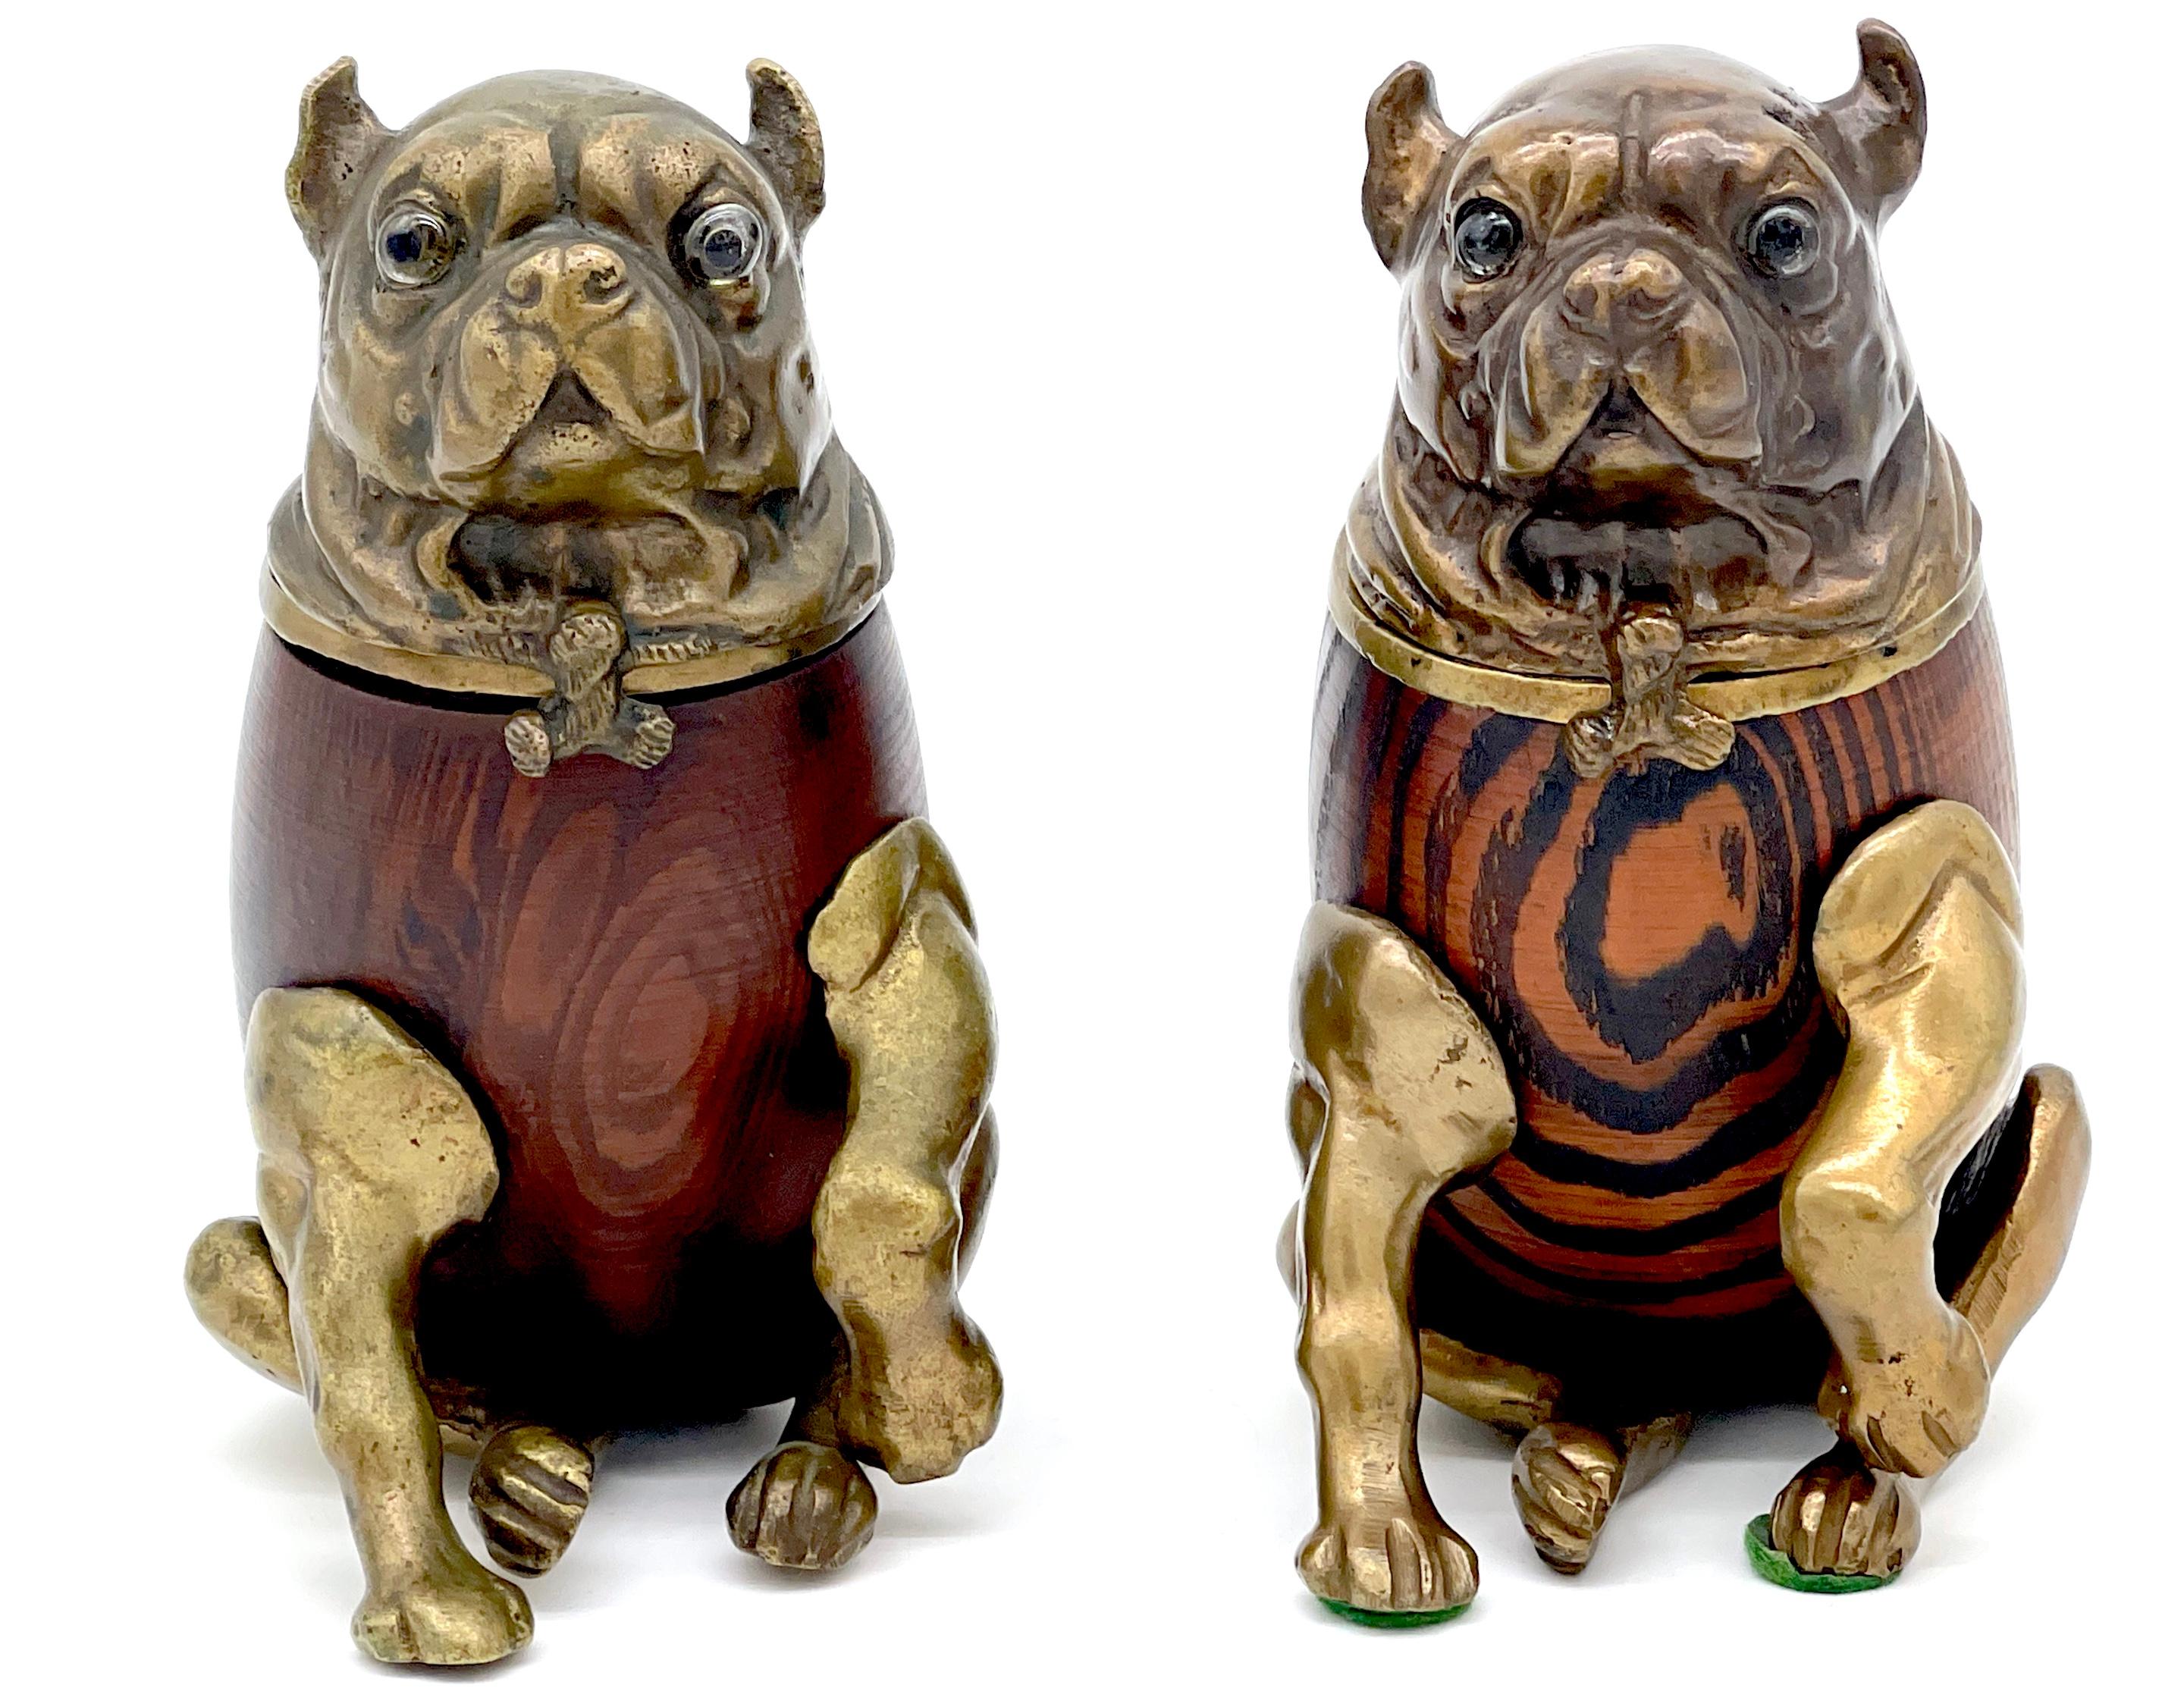 Two Victorian Style Brass & Wood Pug Dog Boxes, by Arthur Court, 1979 

*Sold individually, please specify the 'Brown' Pug on the left or the 'Brindle' Pug on the right or purchase both

Indulge in whimsical canine charm with these Victorian style